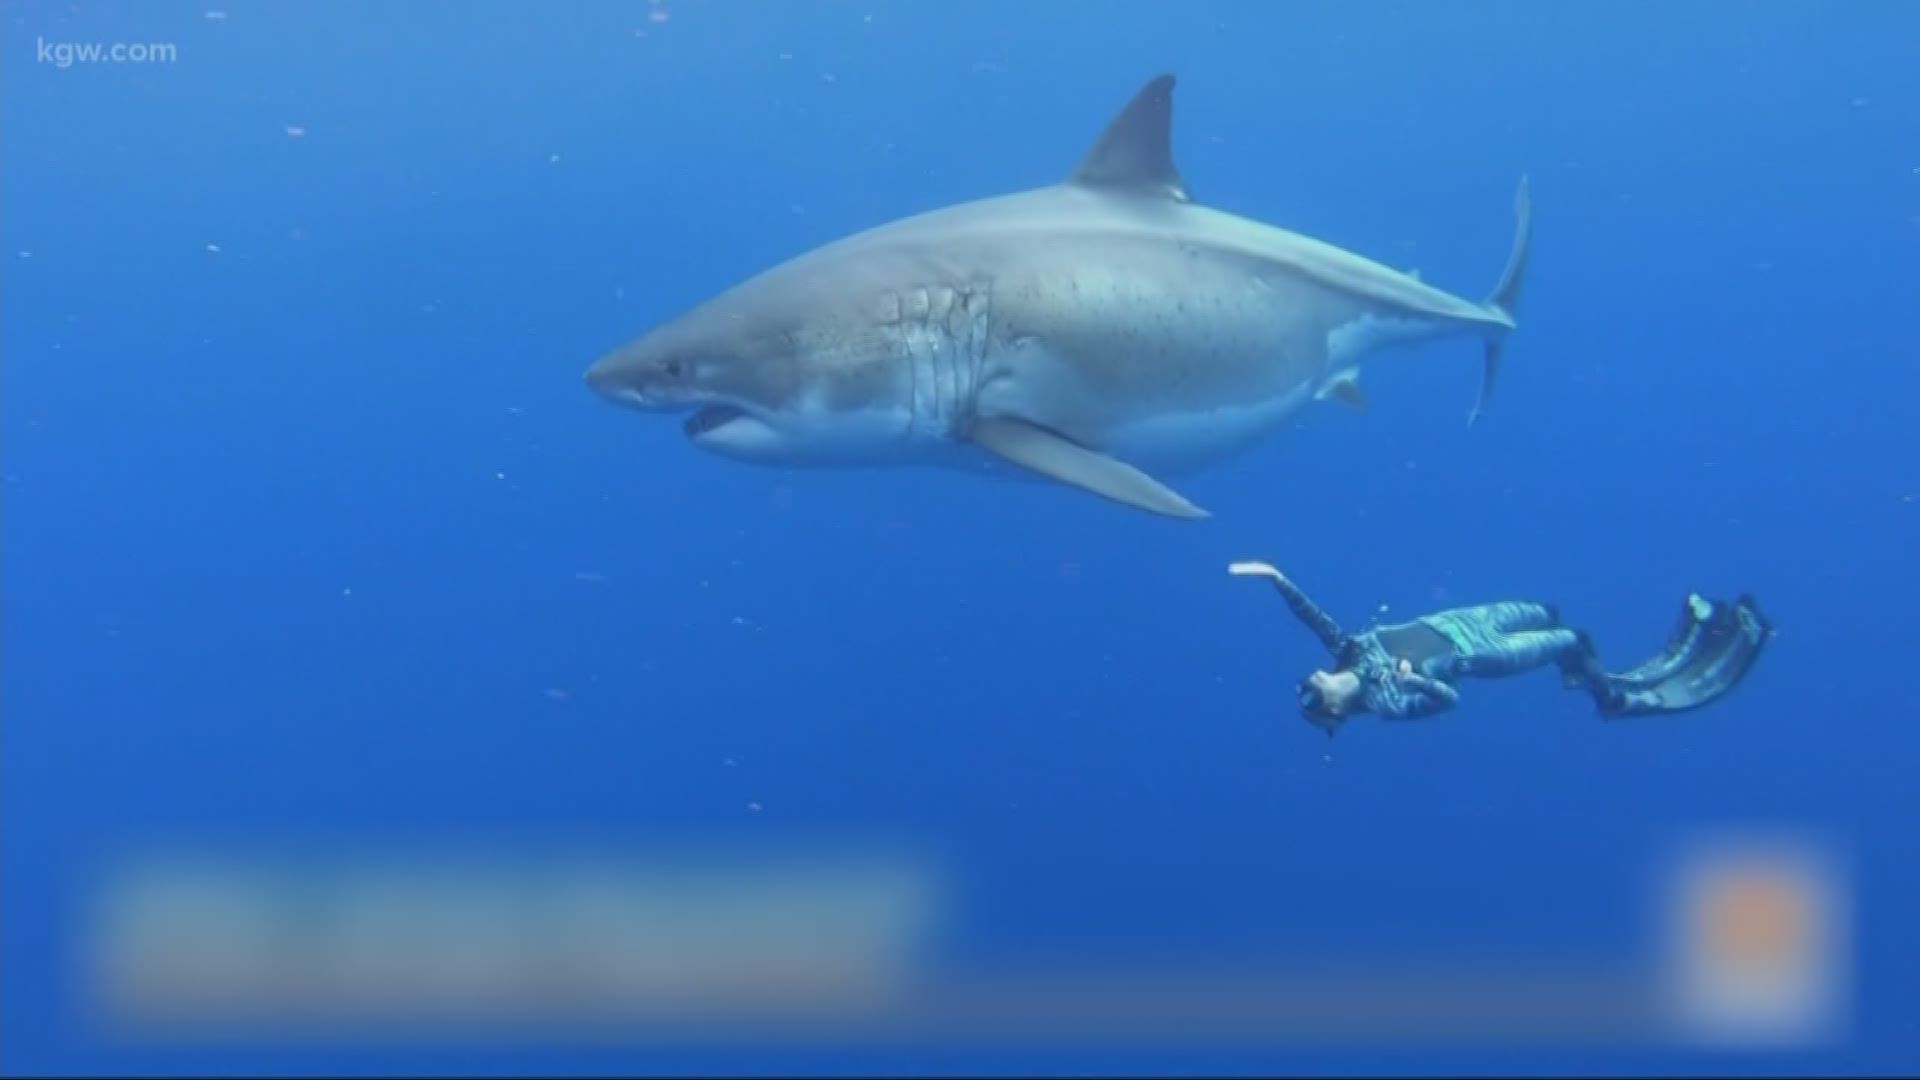 Ocean Ramsey, a shark researcher and conservationist, said she encountered the 20-foot shark off Oahu.